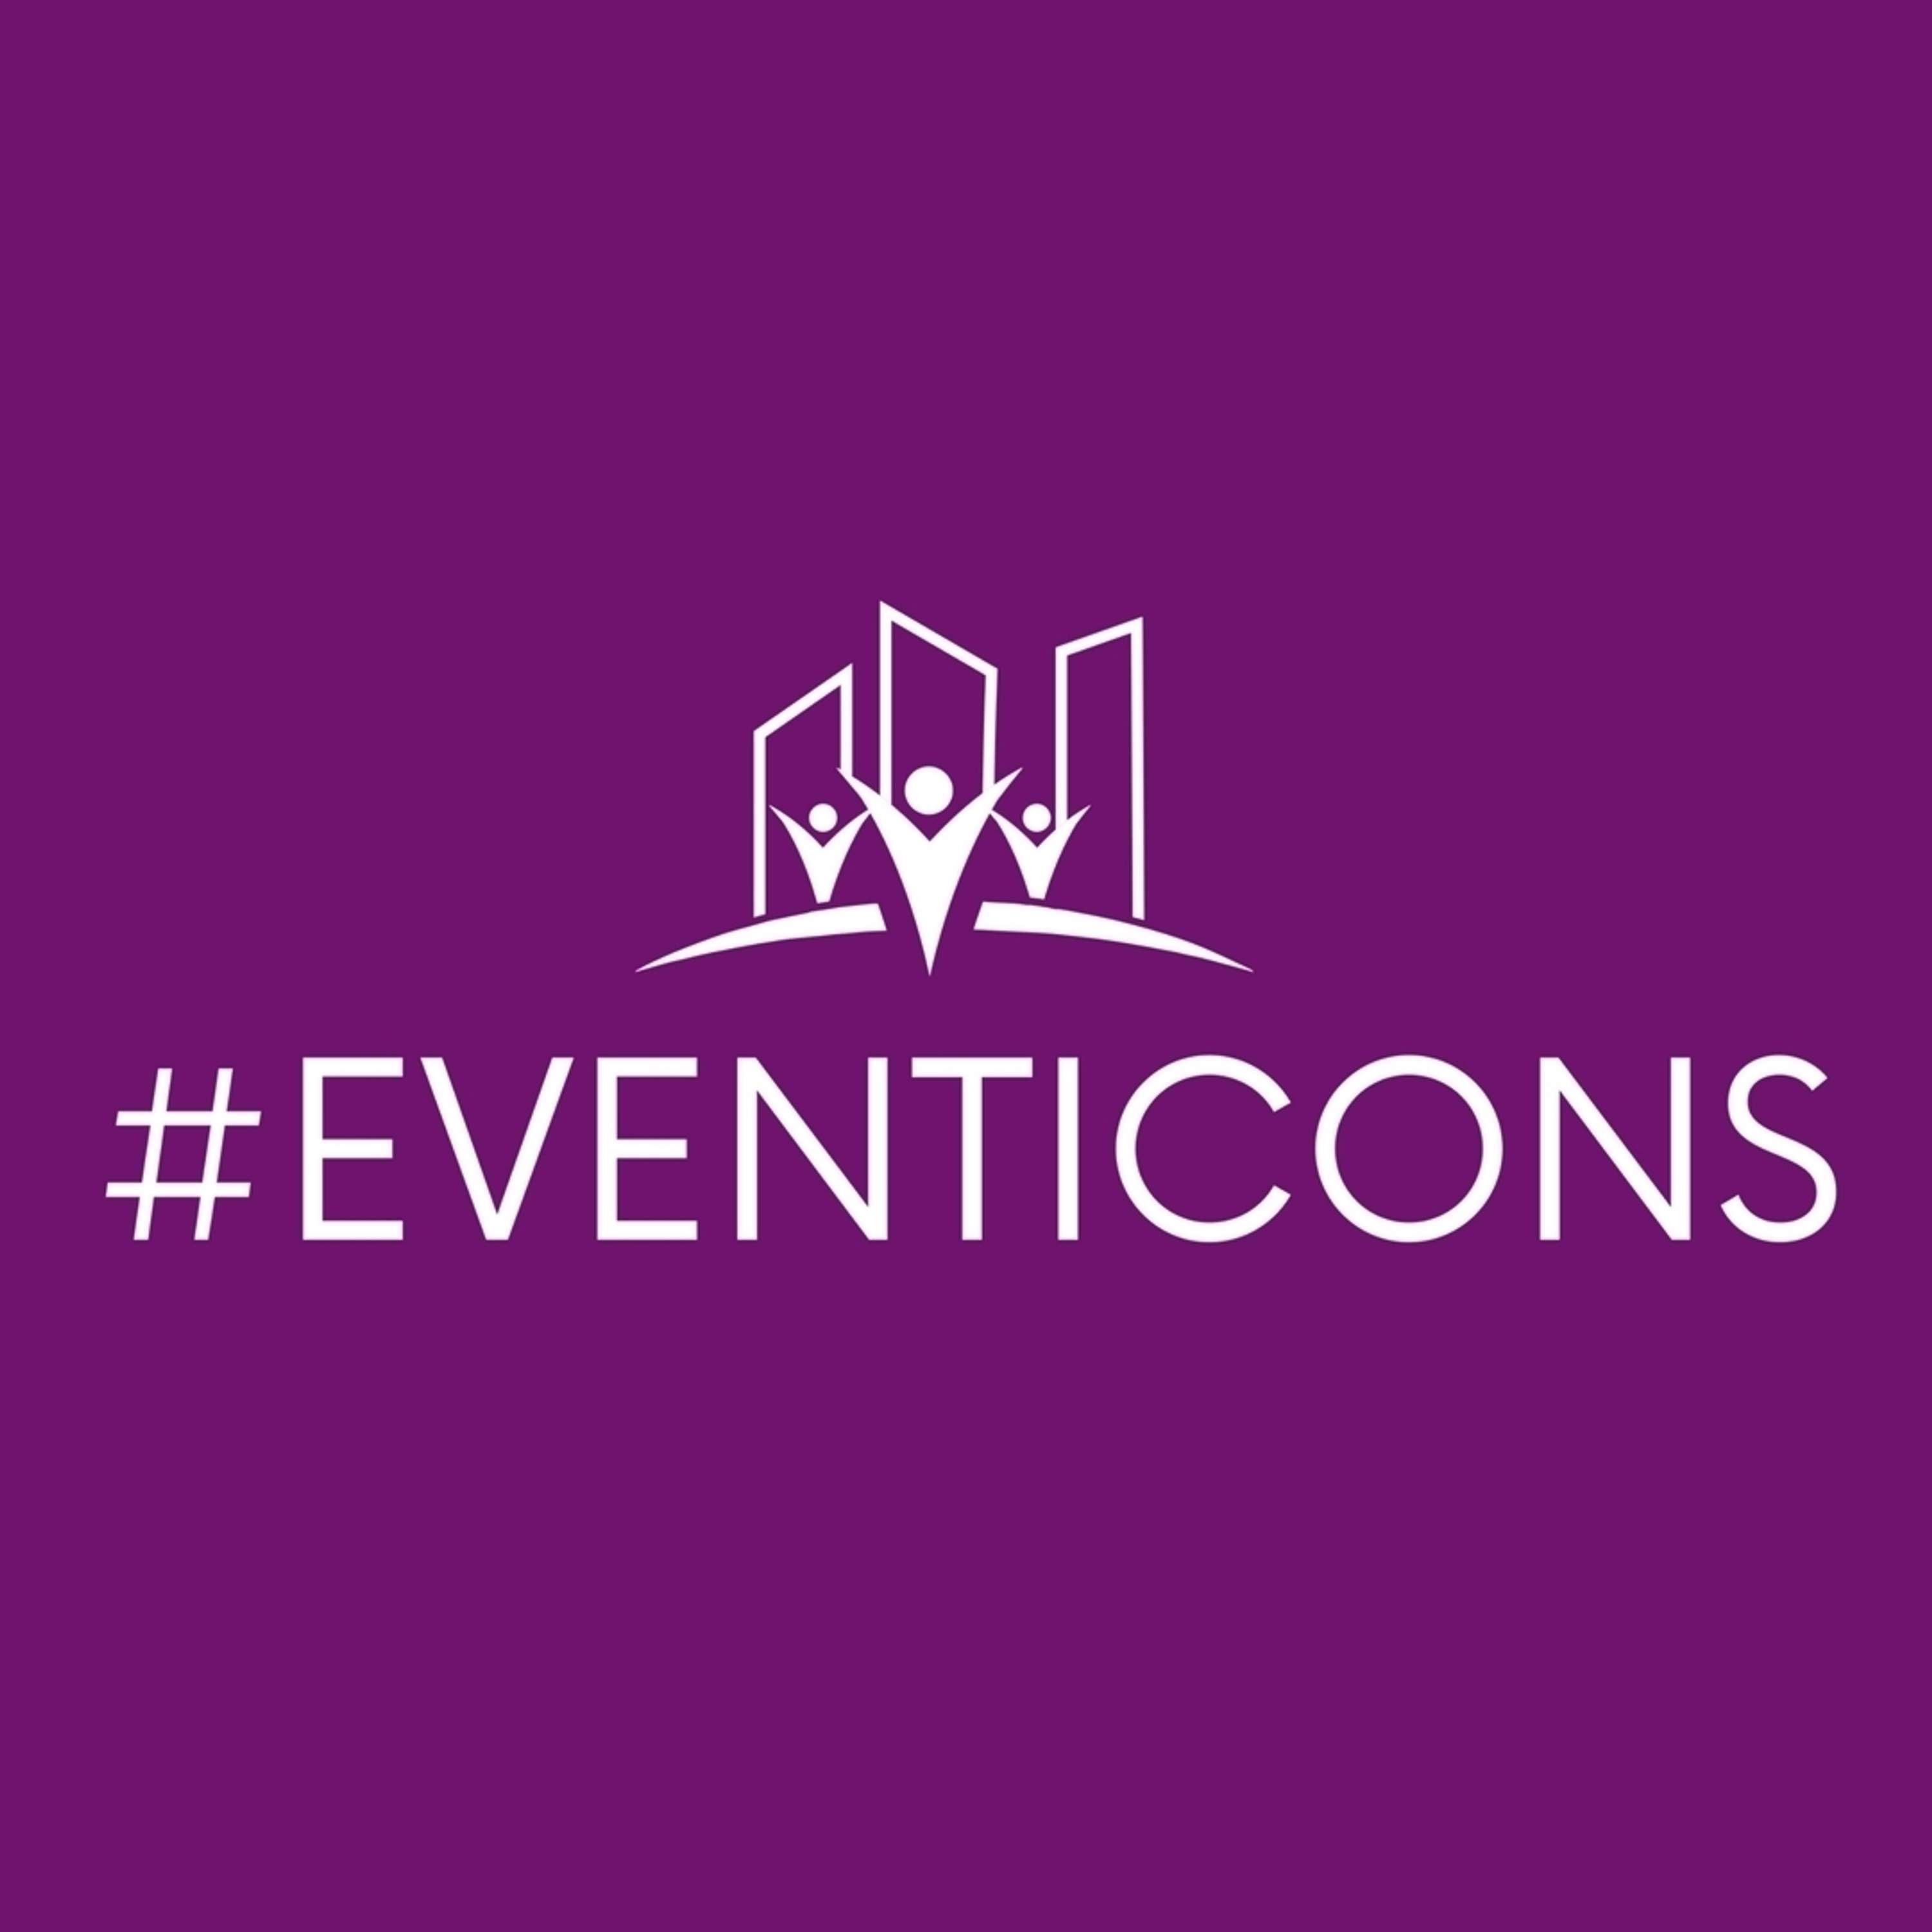 #EventIcons Special: 200 Episodes Of Iconic Conversations!